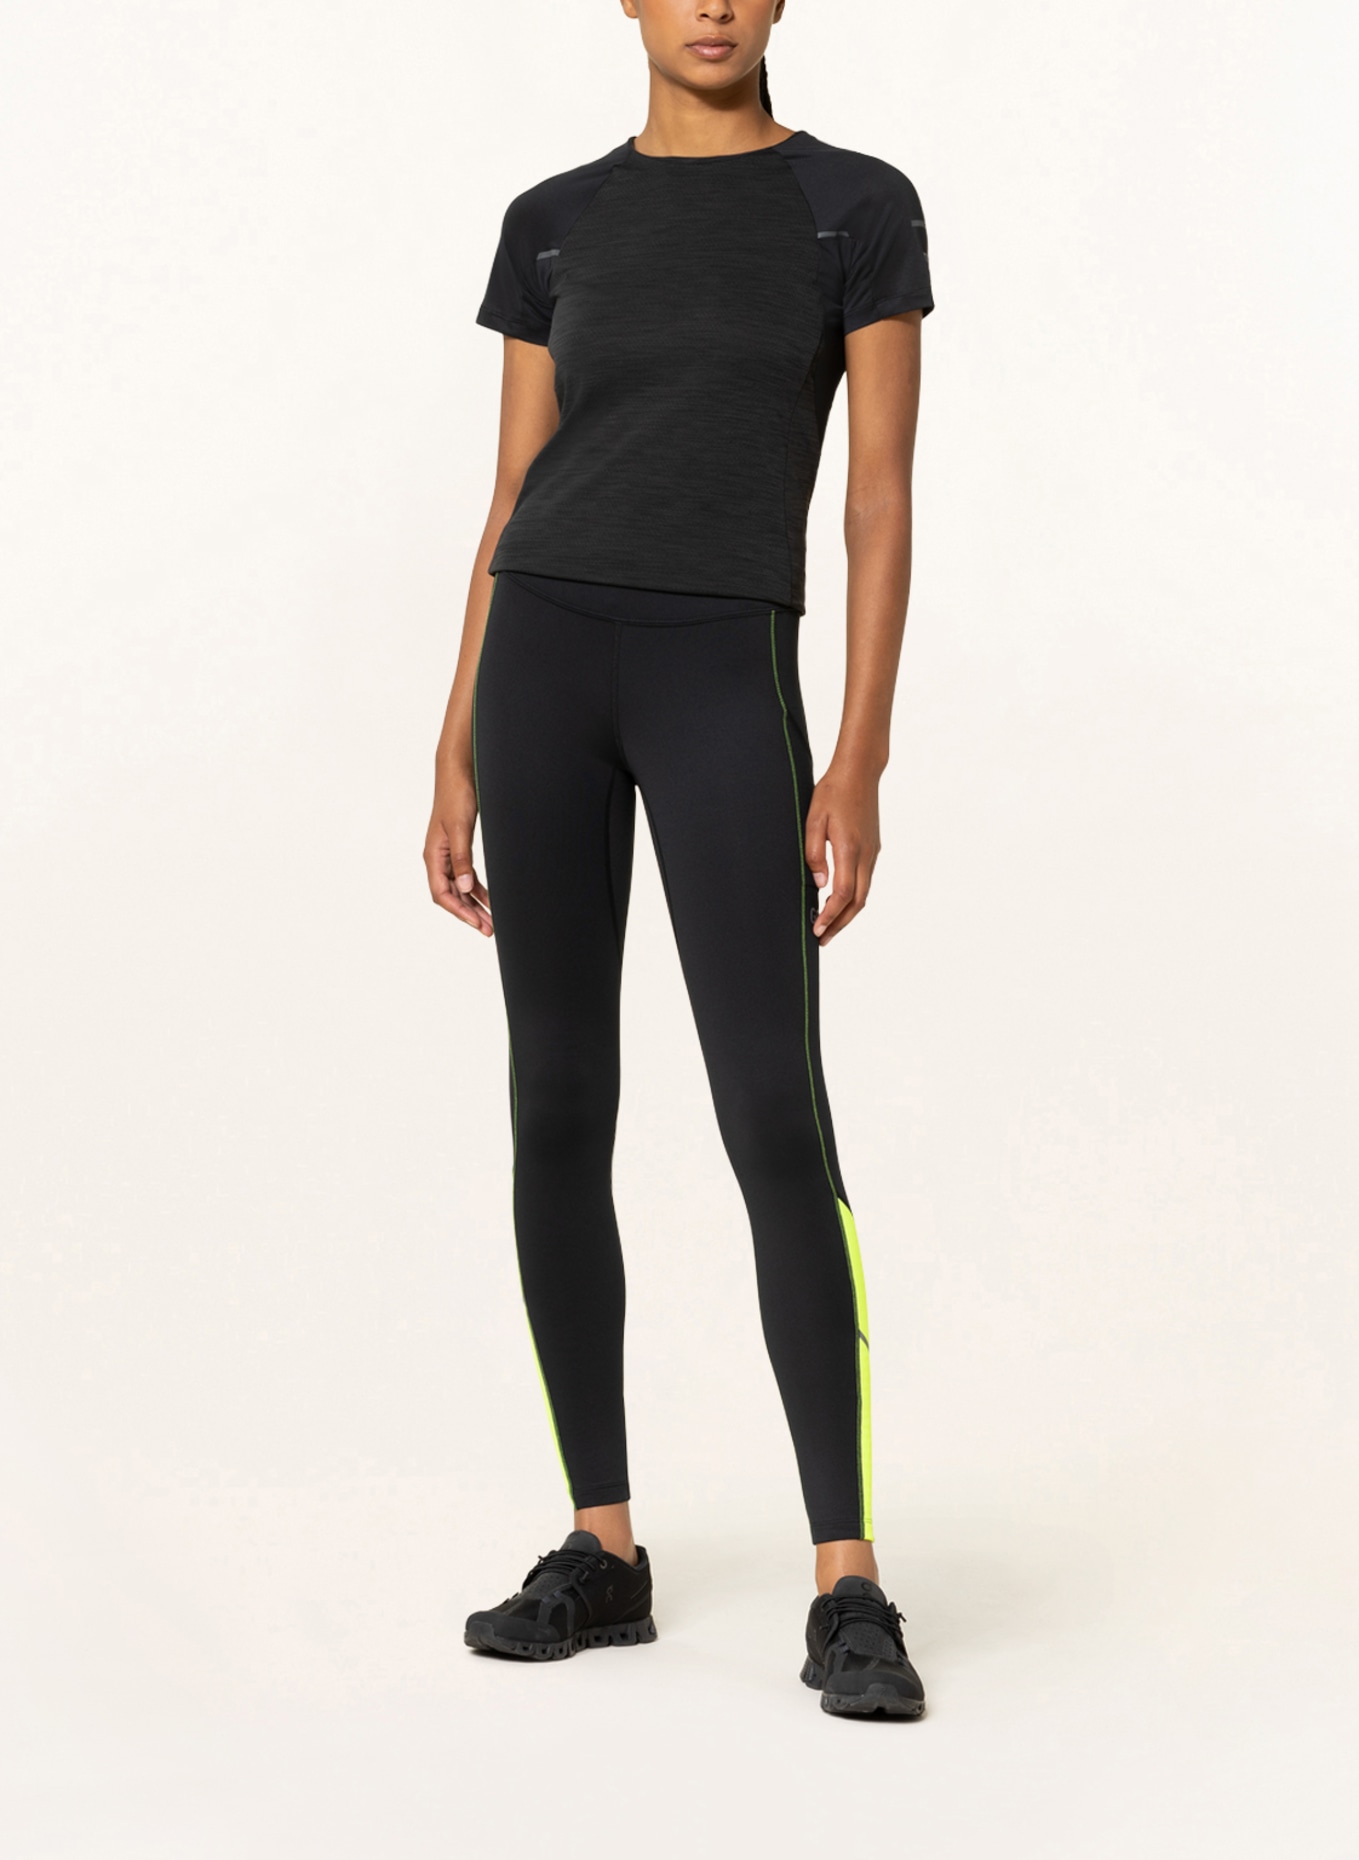 GORE RUNNING WEAR 7/8 tights R3, Color: BLACK/ NEON YELLOW (Image 2)